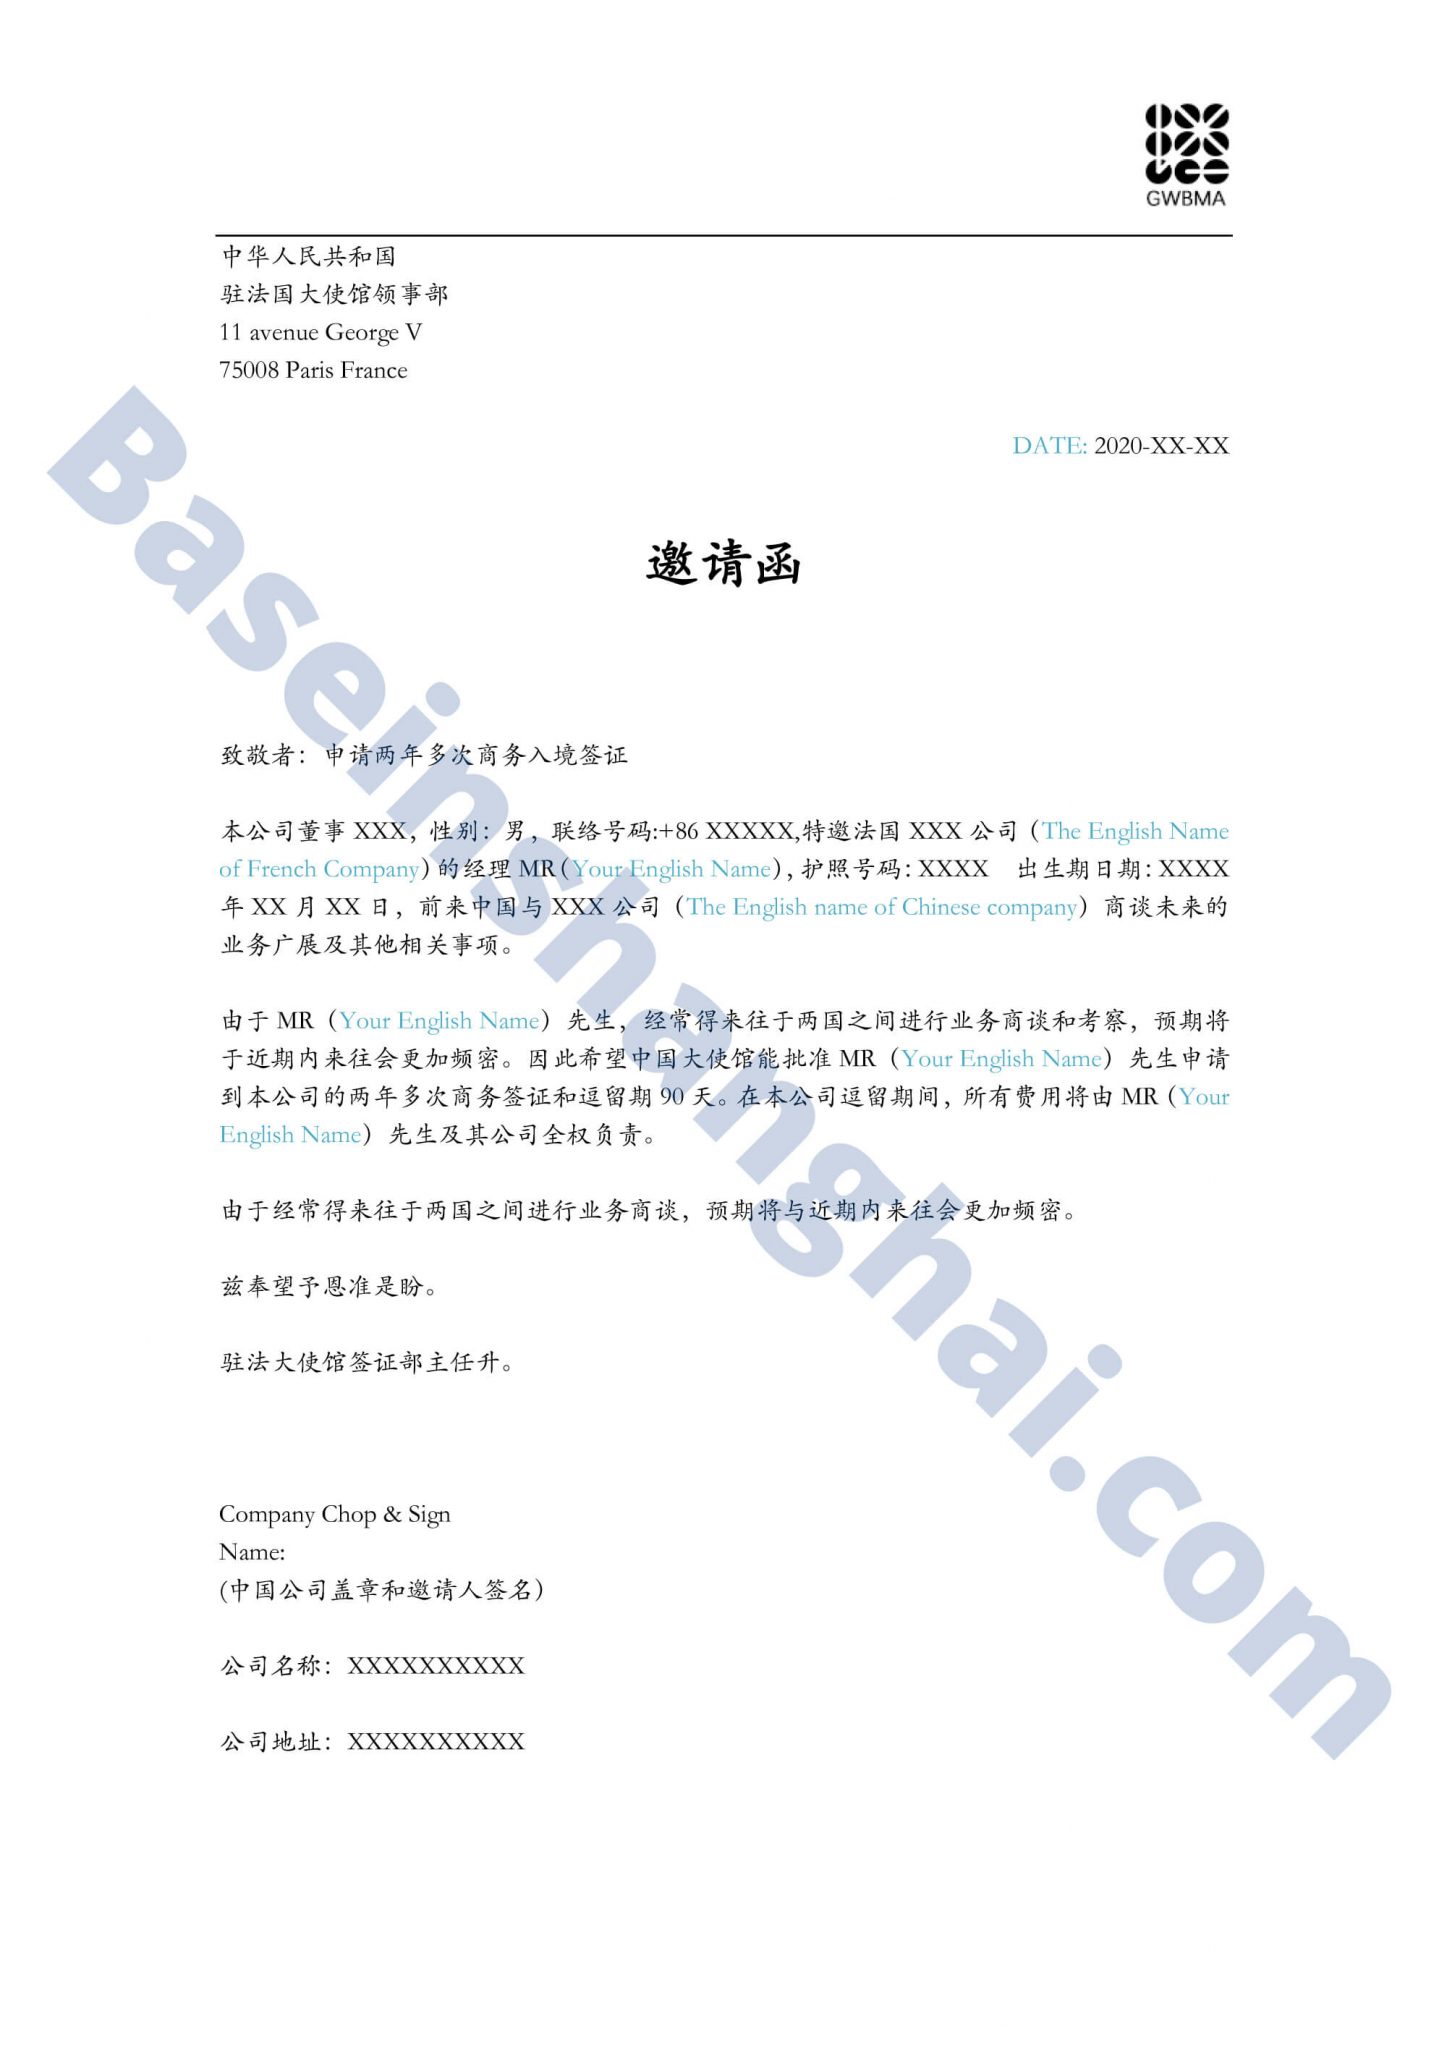 How to write a Chinese invitation letter - China VISA Application Guides